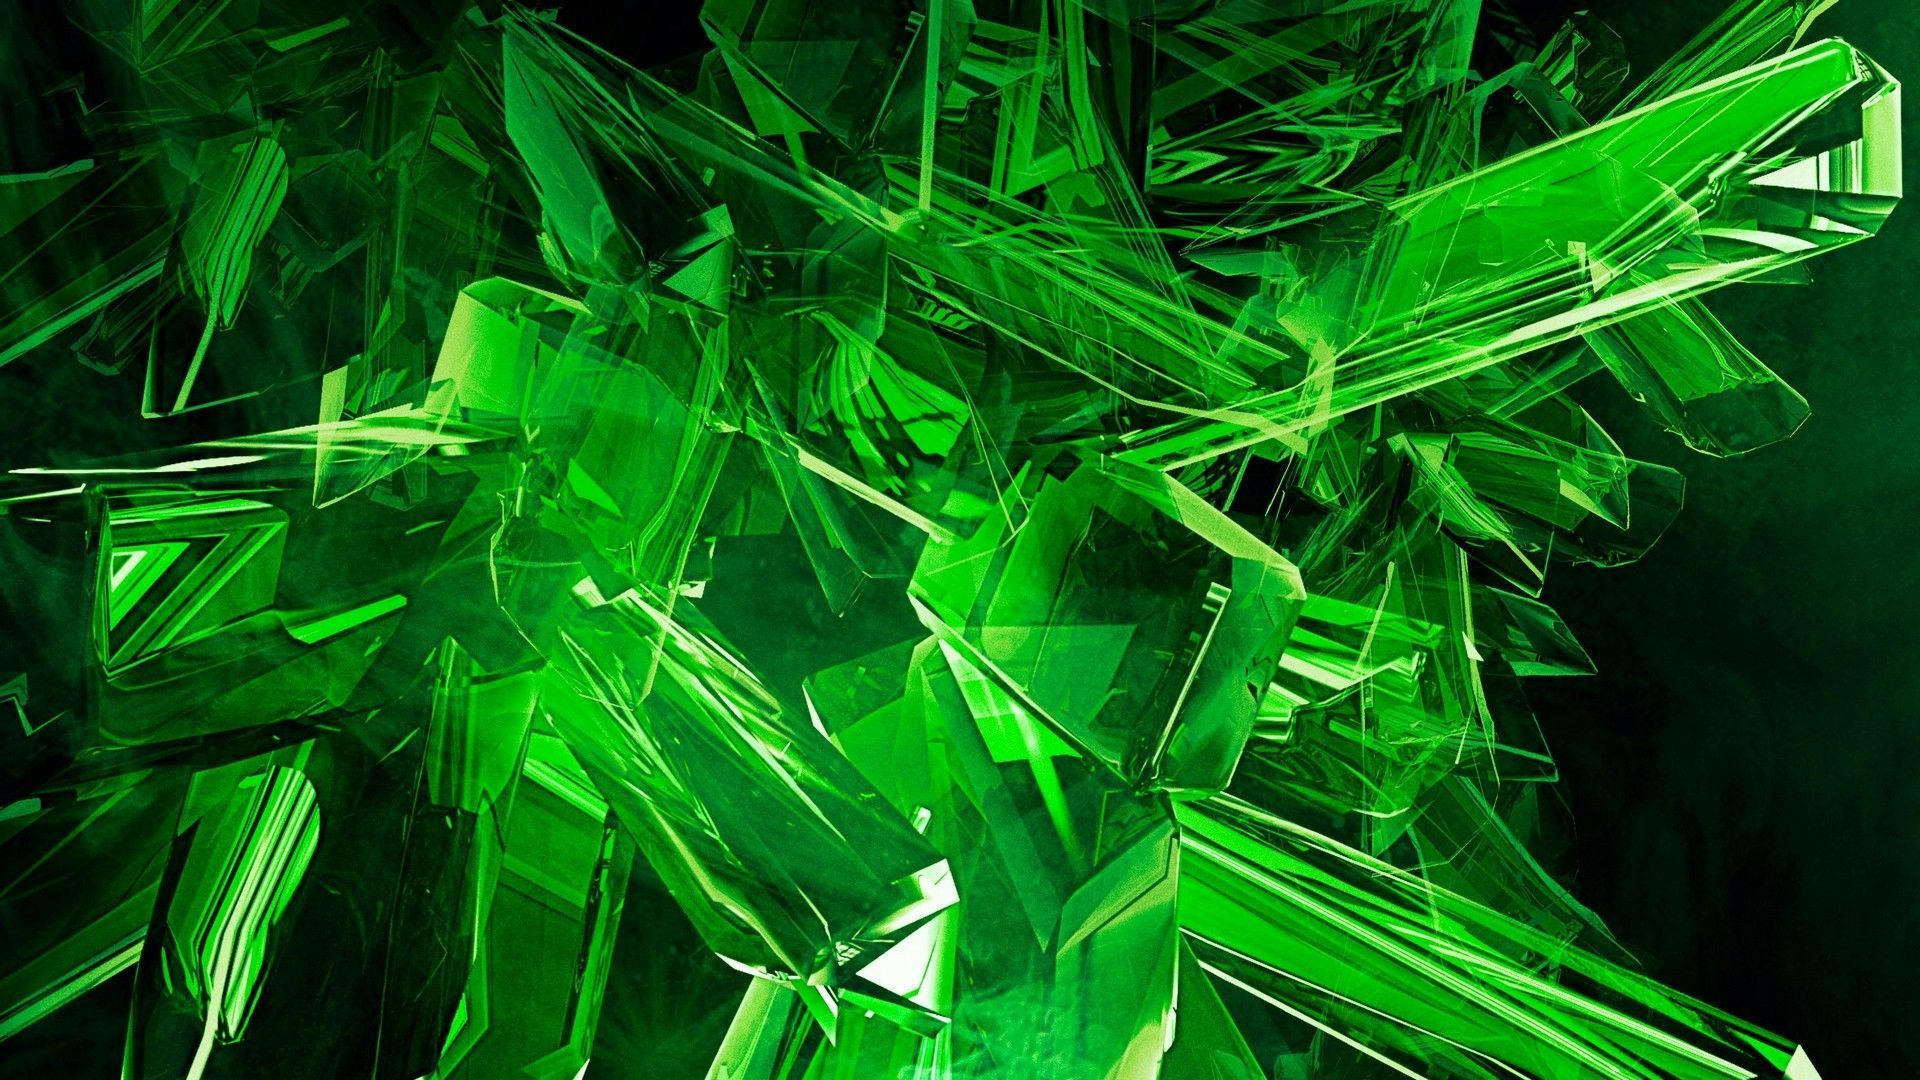 A green crystal sculpture on black background - Neon green, lime green, 3D